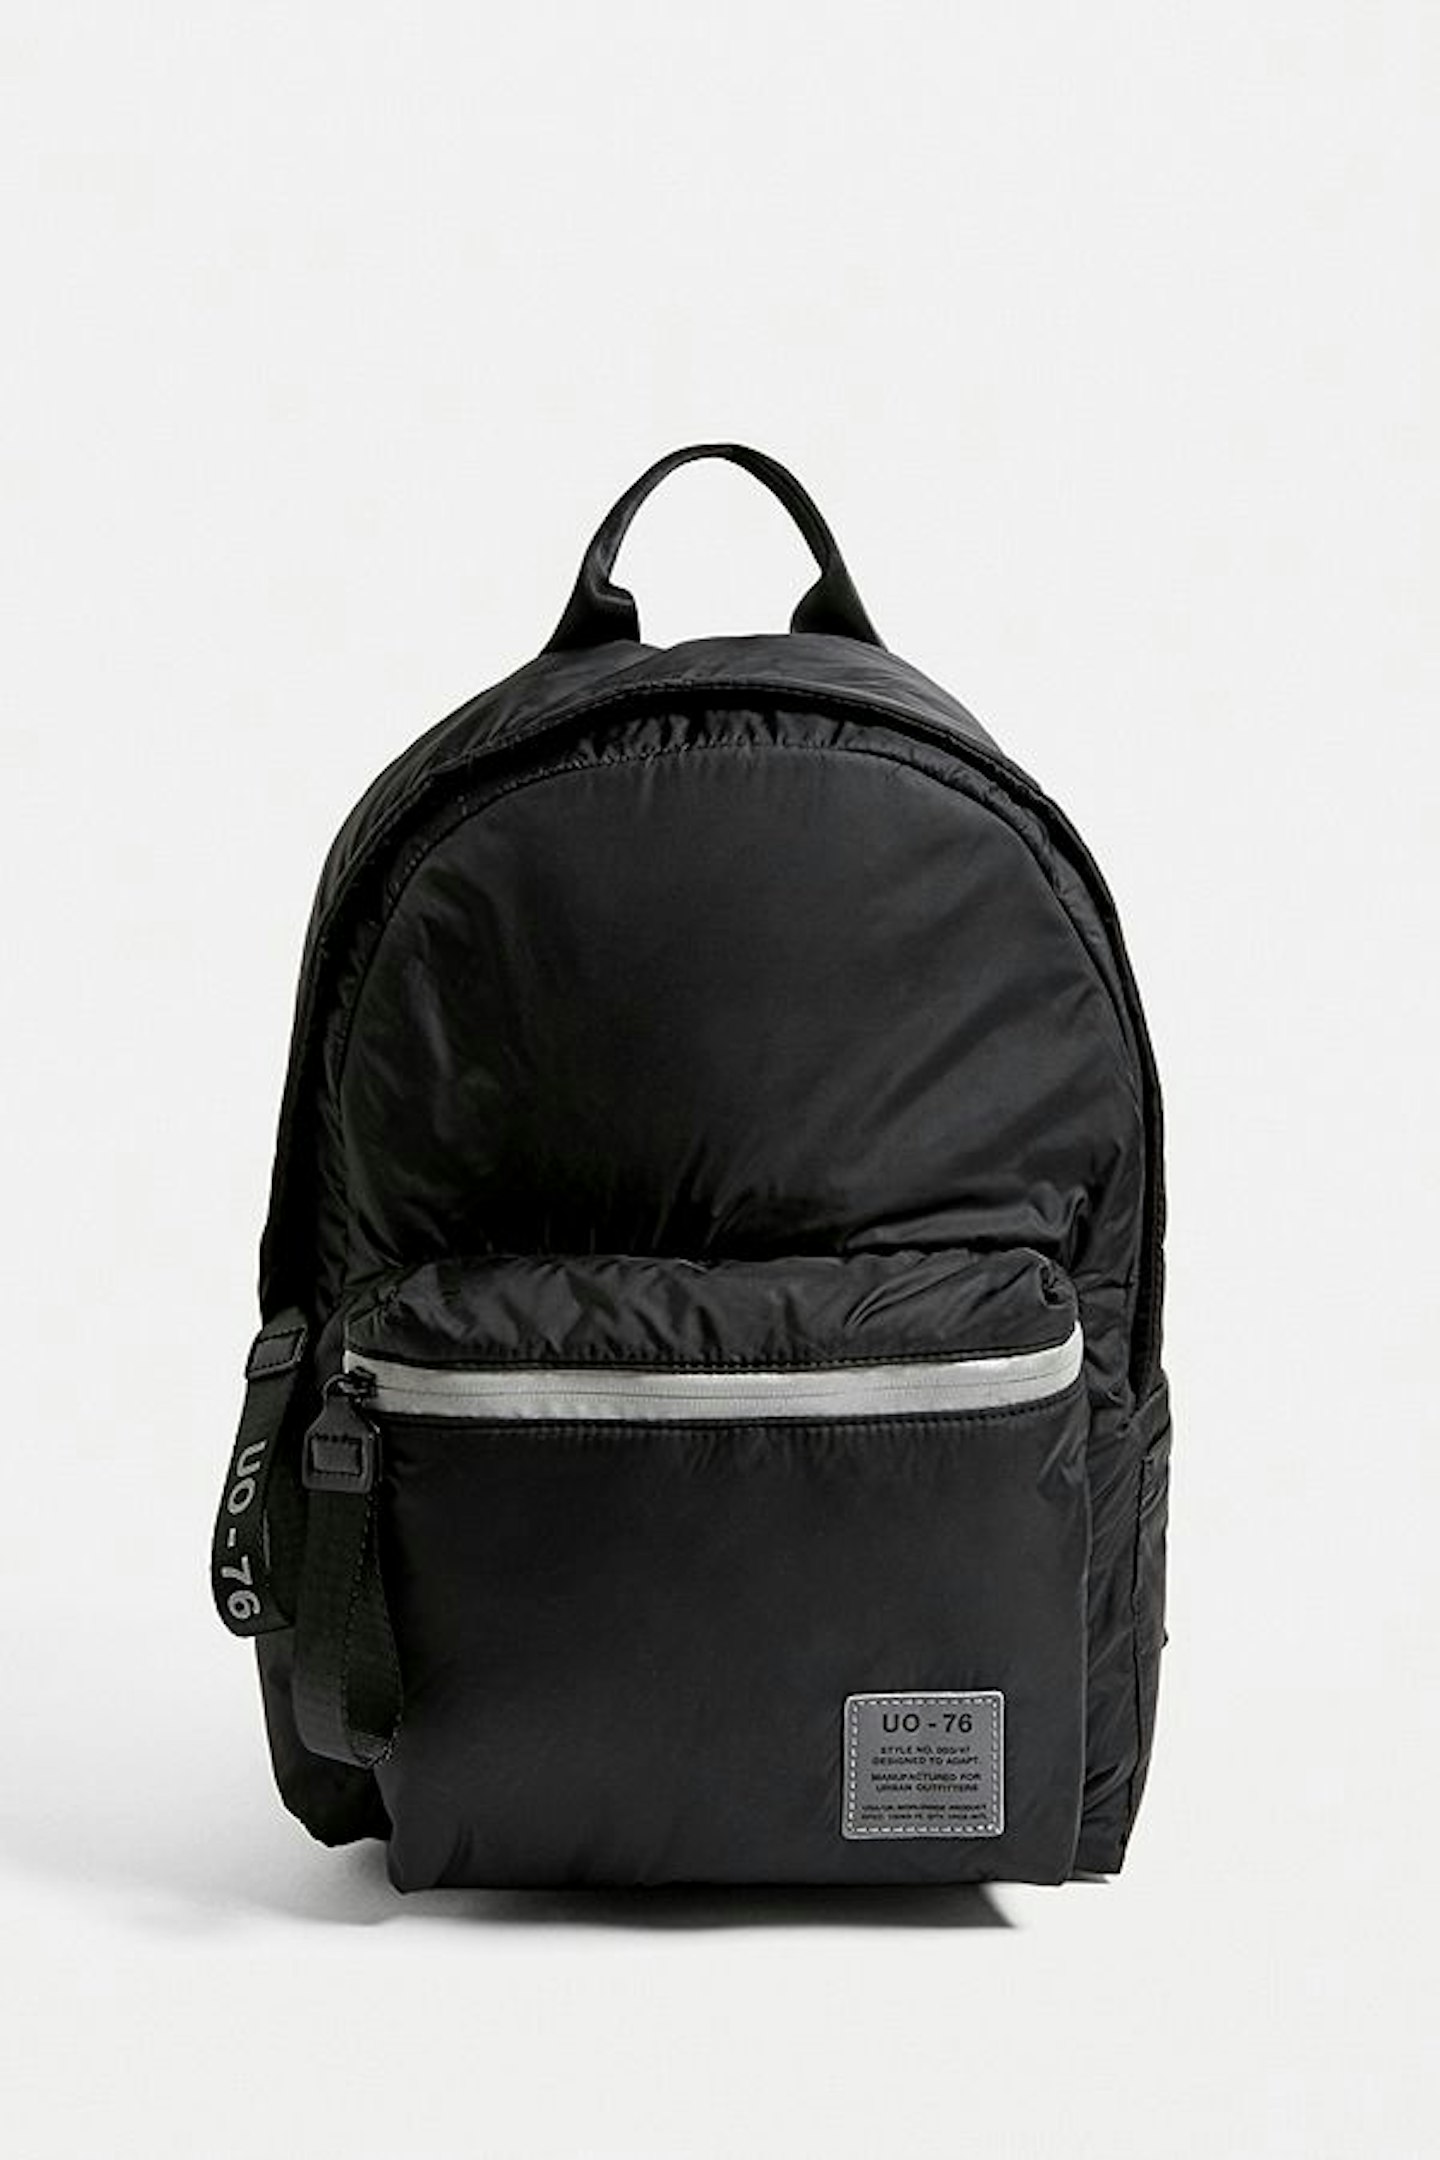 Urban Outfitters, Reflective Puffer Backpack, £36